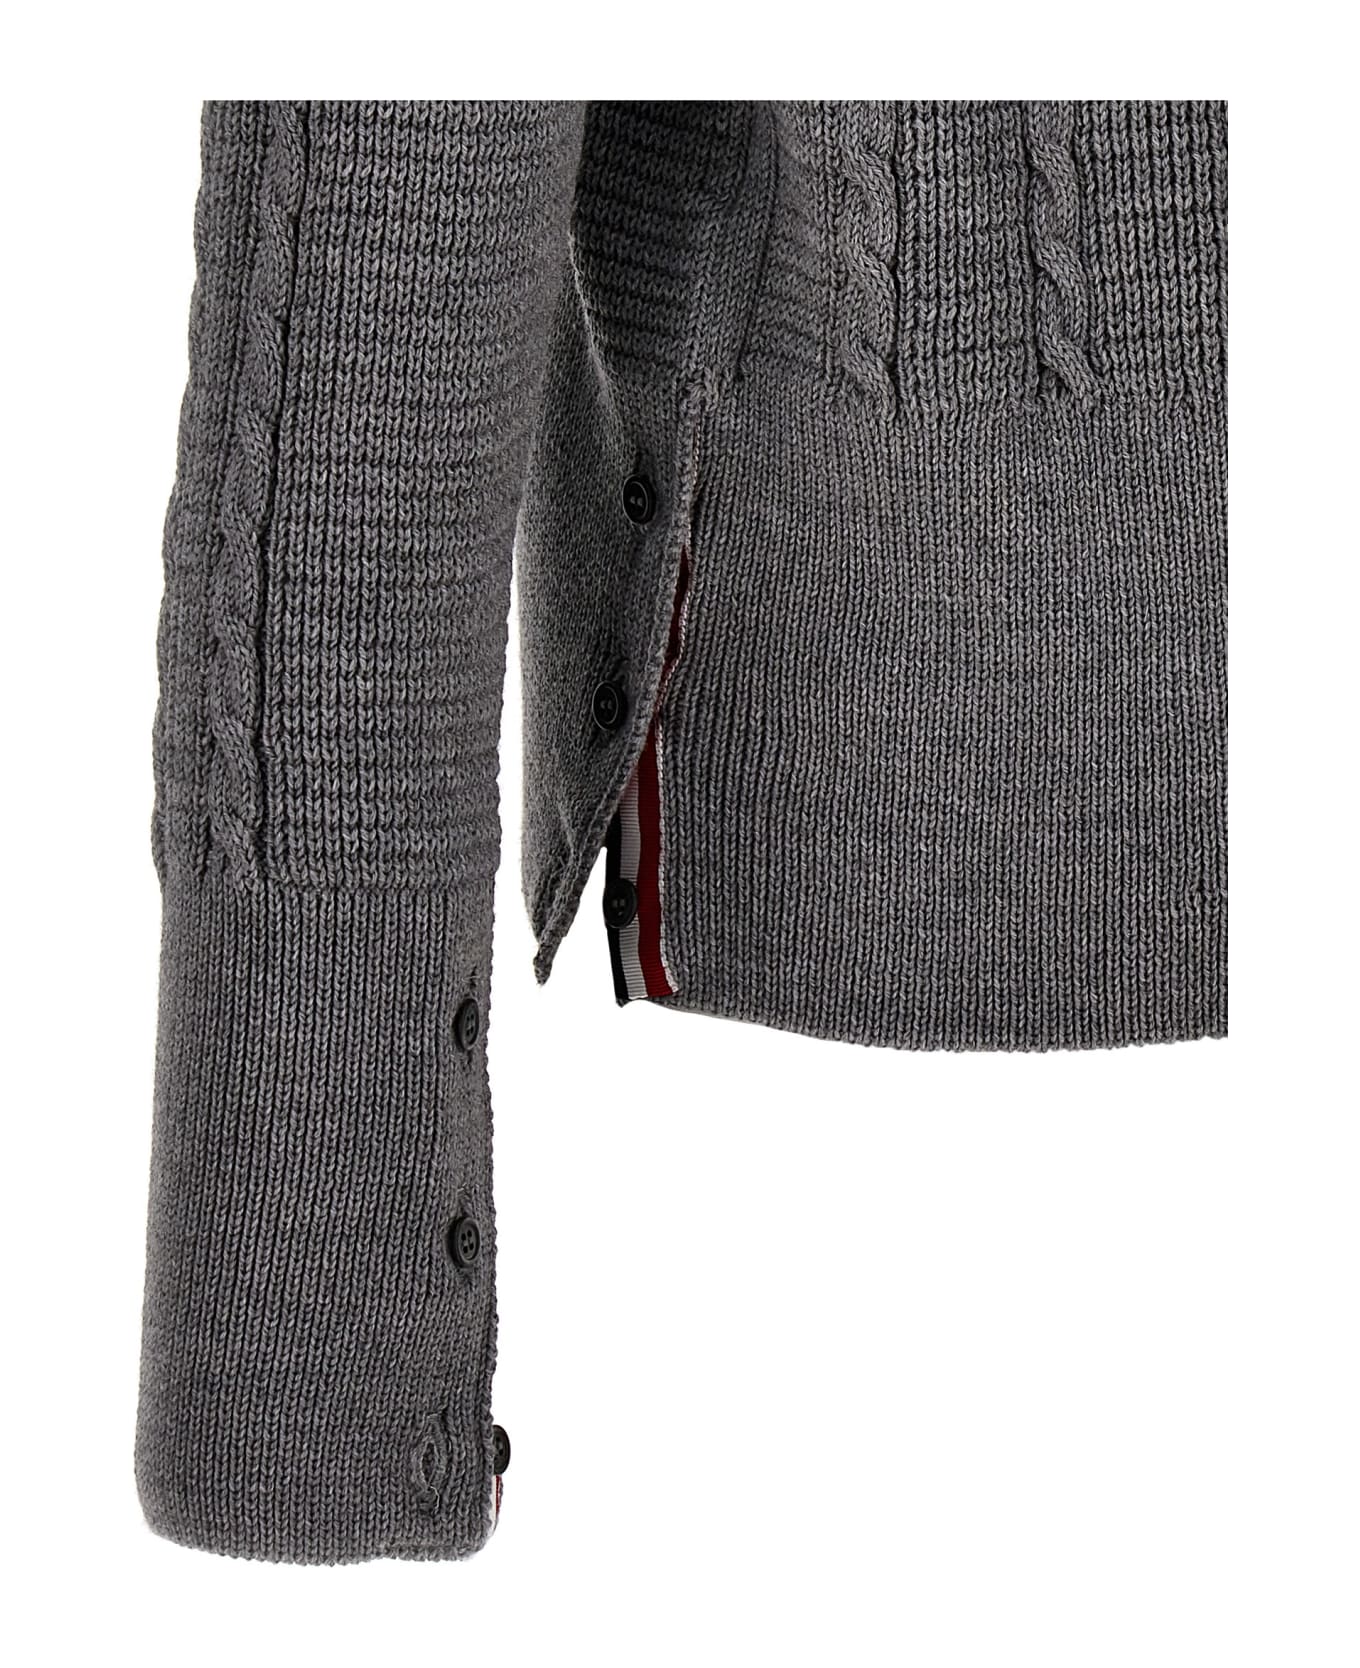 Thom Browne 'cable Stitch' Cardigan - Gray